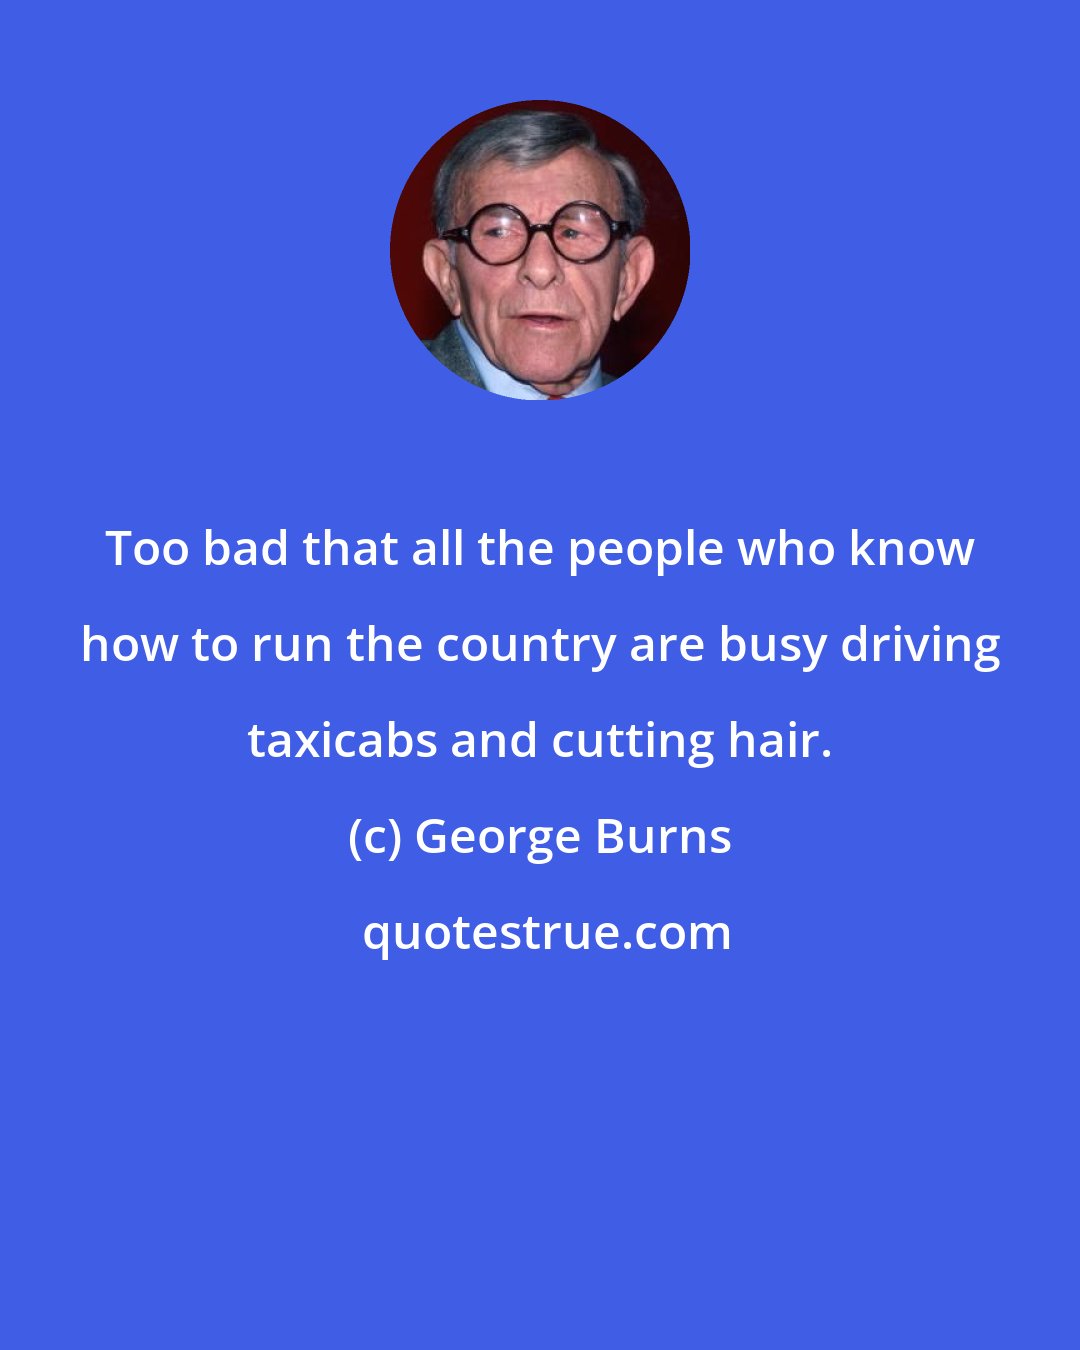 George Burns: Too bad that all the people who know how to run the country are busy driving taxicabs and cutting hair.